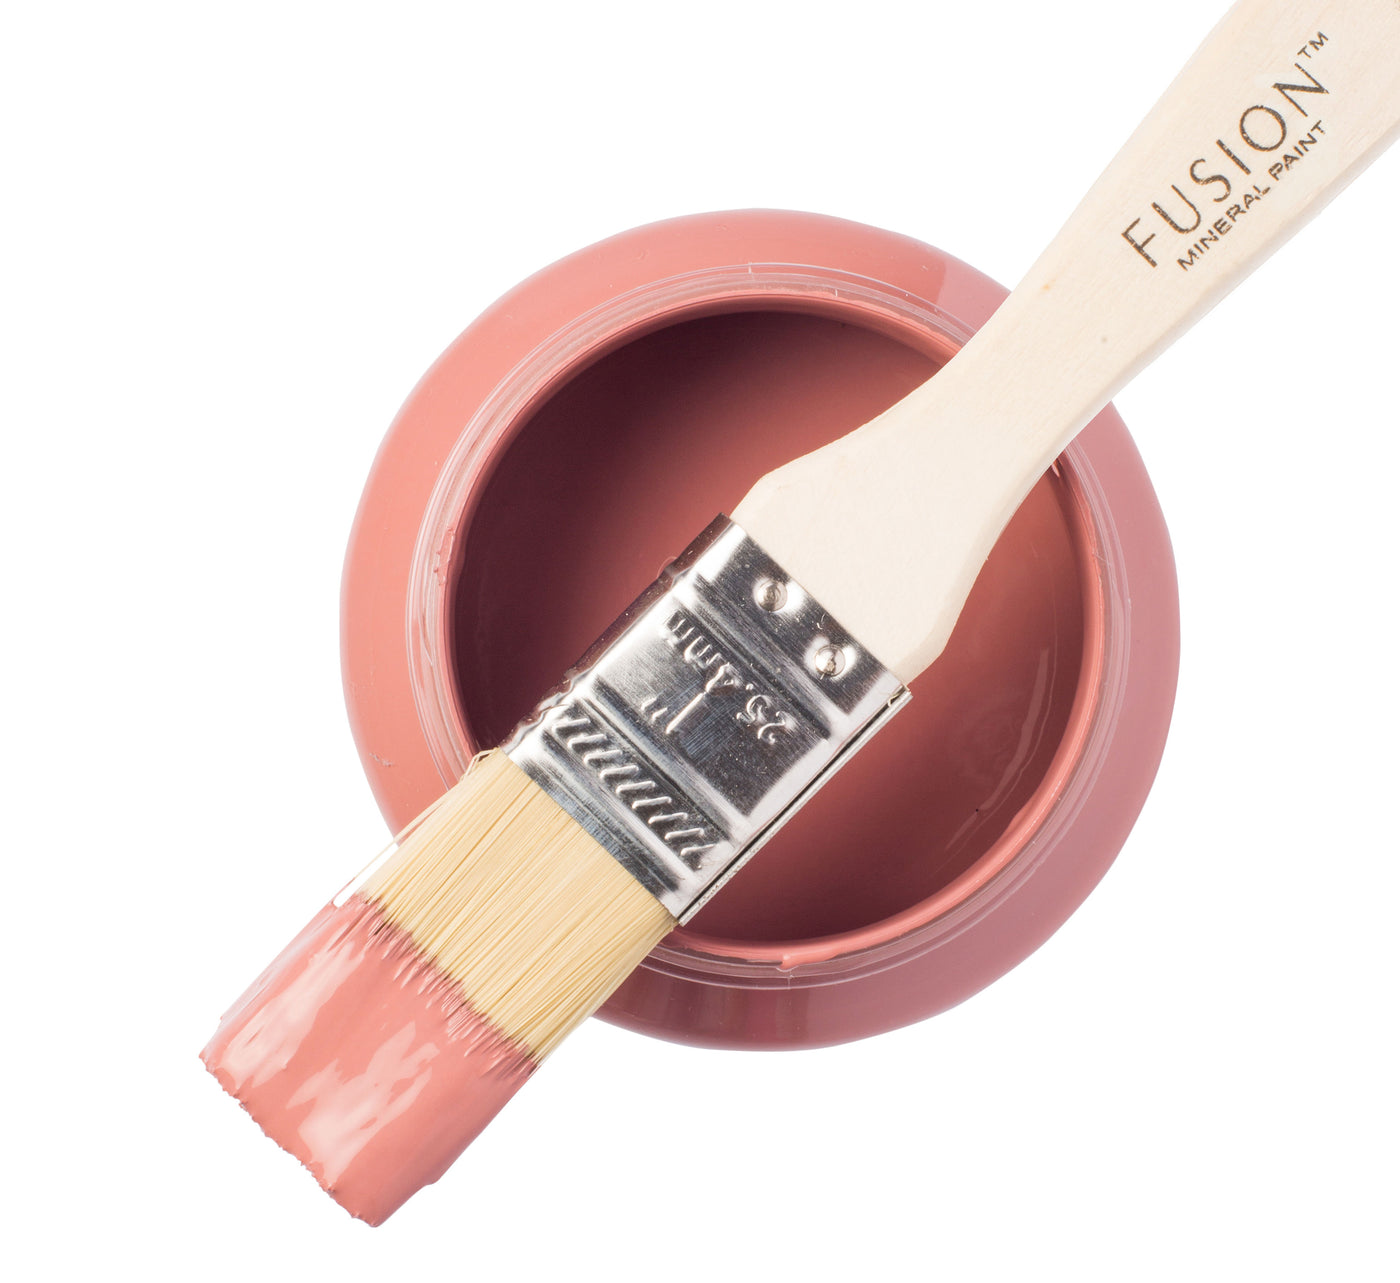 Warm rose paint can and brush from Fusion Mineral Paint